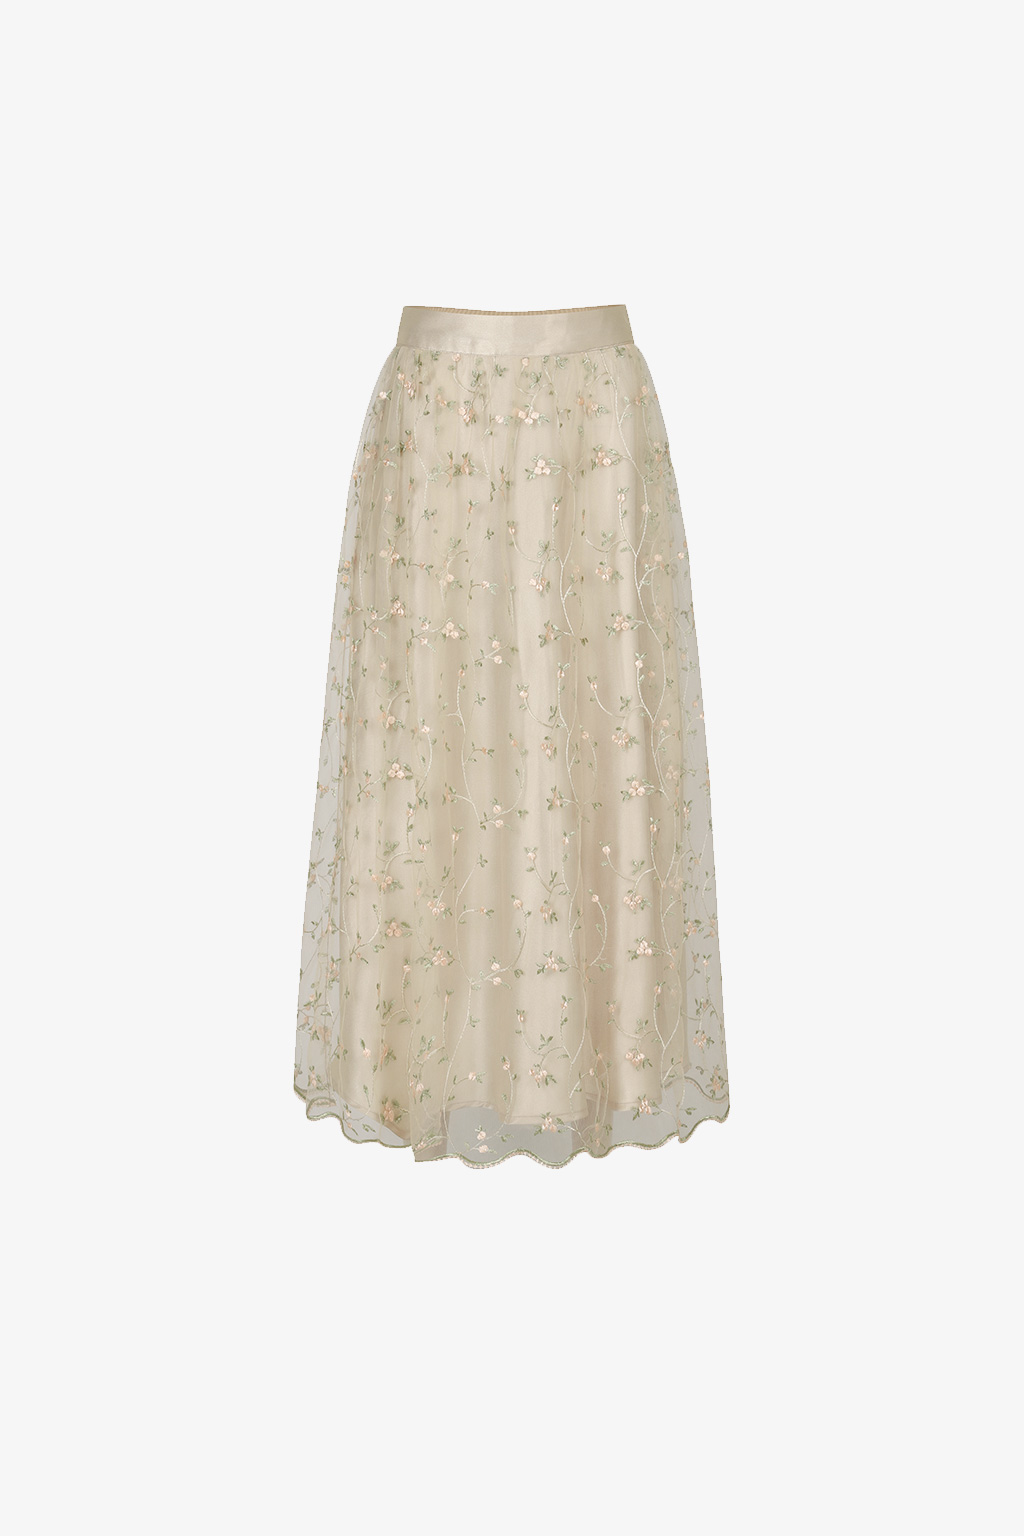 [ASTIER] blooming lace skirt